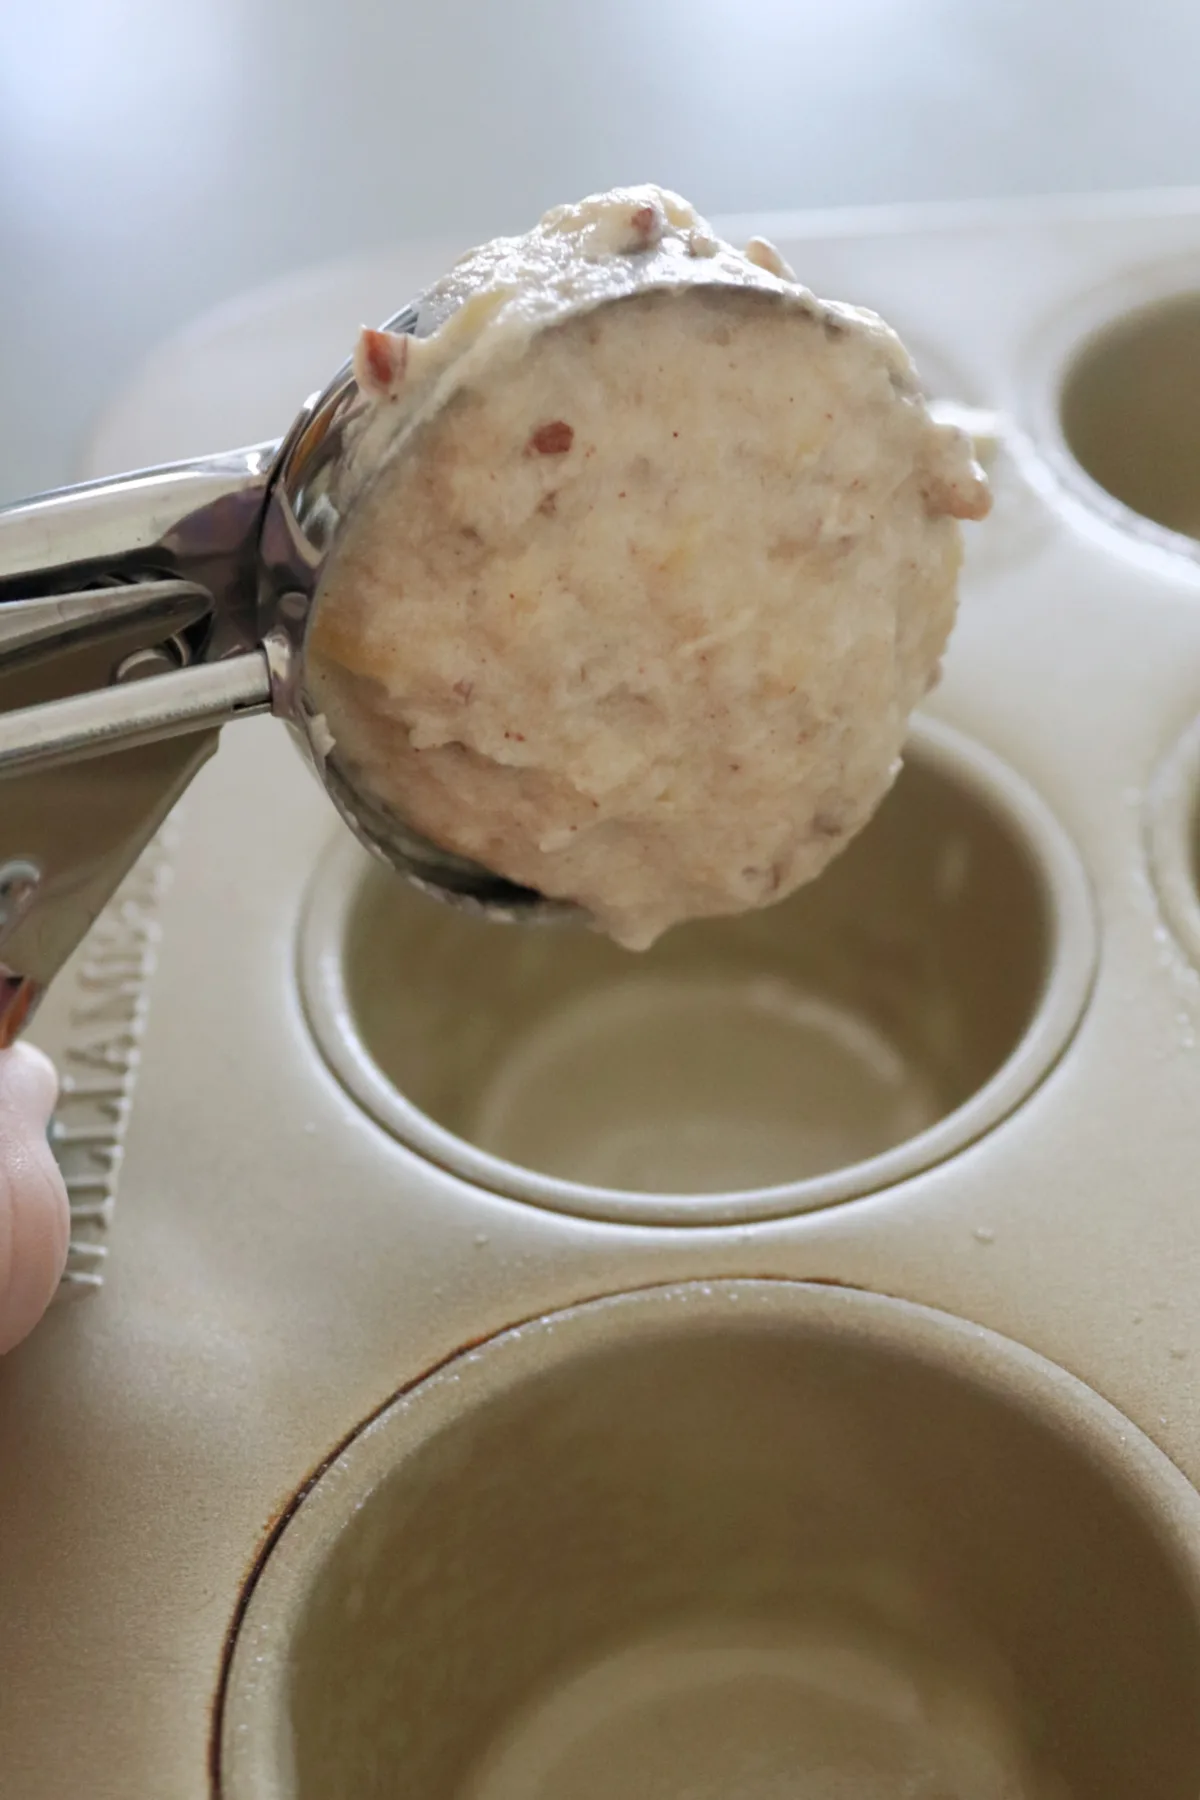 Batter in a scoop being put into a muffin tin.